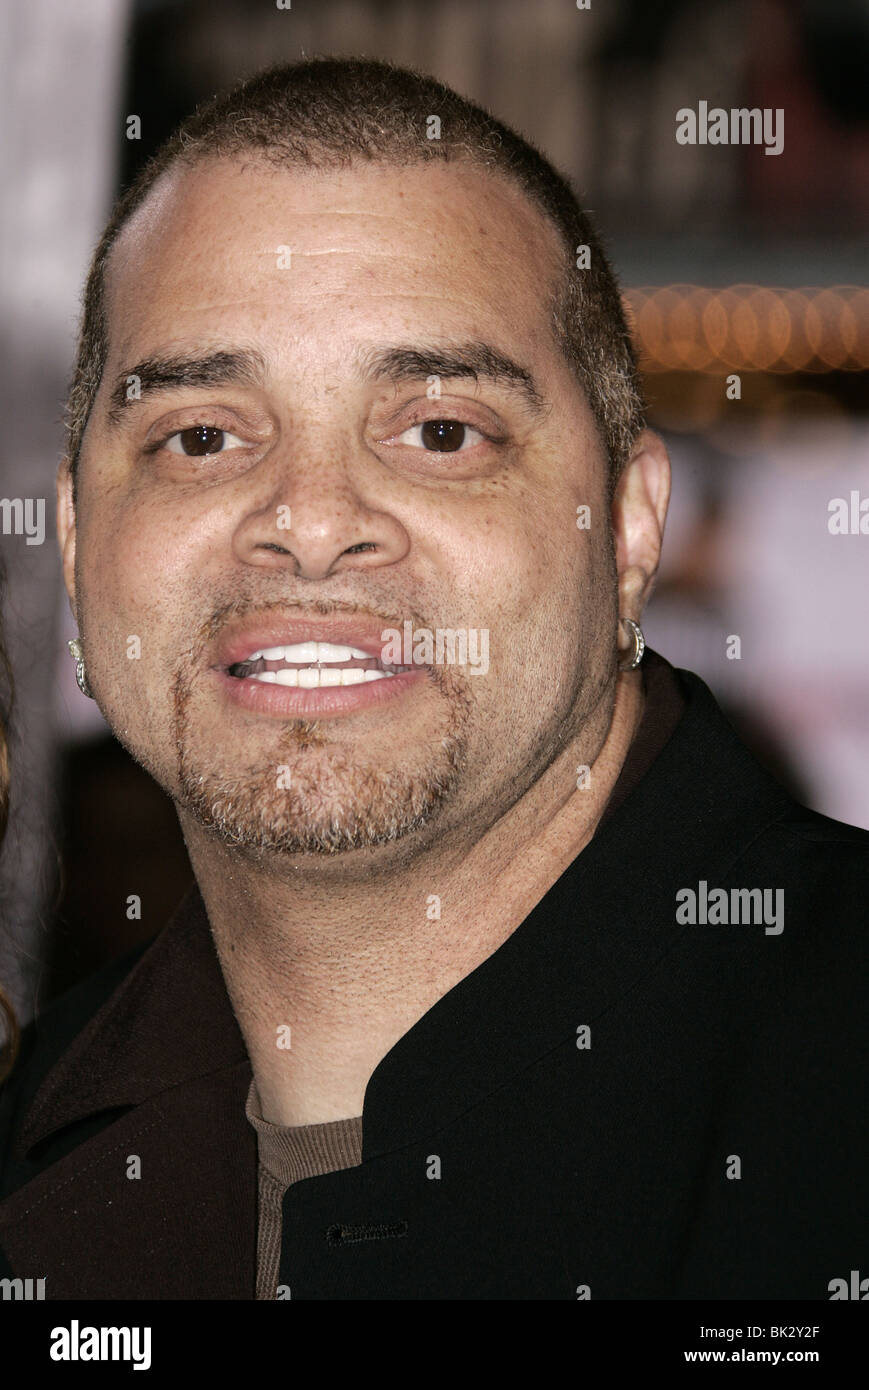 SINBAD THE PURSUIT OF HAPPYNESS WORLD PREMIERE WESTWOOD LOS ANGELES USA 07 December 2006 Stock Photo